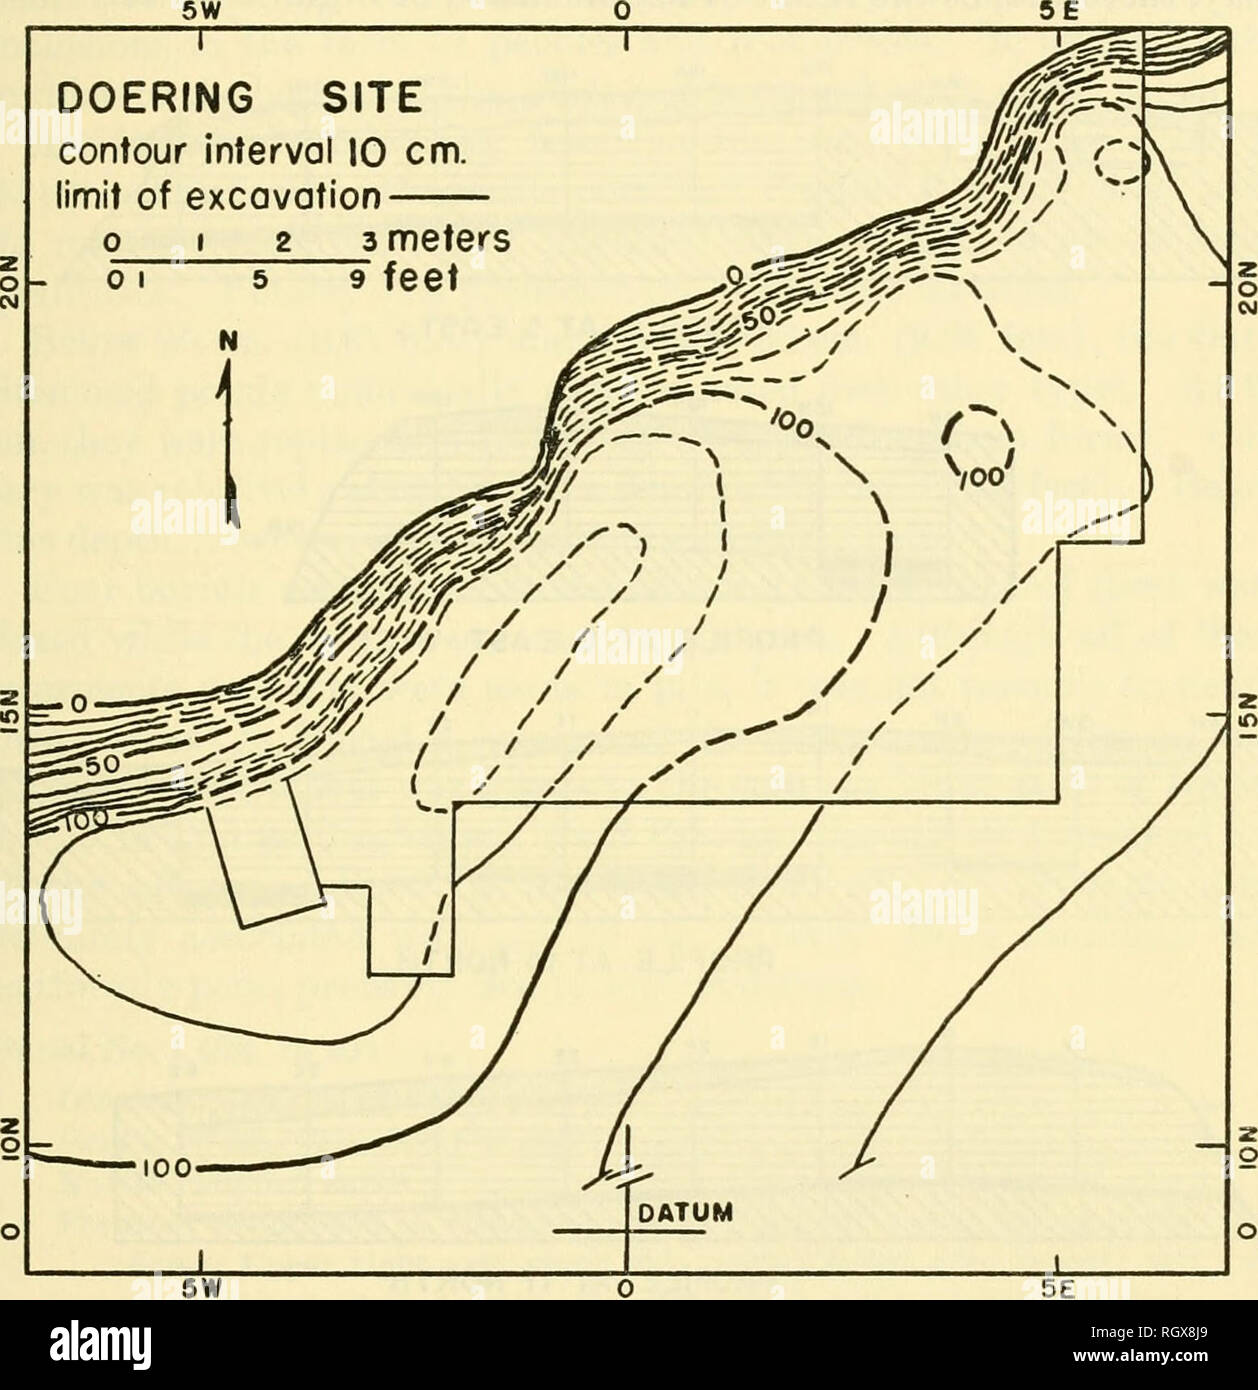 . Bulletin. Ethnology. Riv. Bas. Sur. Pap. No. 4] ADDICKS BASIN—WHEAT 169 in a grid of 1 m. (3.28 feet) squares numbered from the datum north along the base line and east or west along lines intersecting the base line at right angles. The stake nearest the datum became the desig- nator for that square. Excavation was by arbitrary levels of 15 cm. (0.49 foot). All material from each 15 cm. (0.49 foot) level and 1 m. (3.28 feet) square was screened and the artifacts segregated.. Figure 8.—Contour map and plan of excavation, Doerlng site (42/66A6-2). Depth was measured from surface at the level o Stock Photo